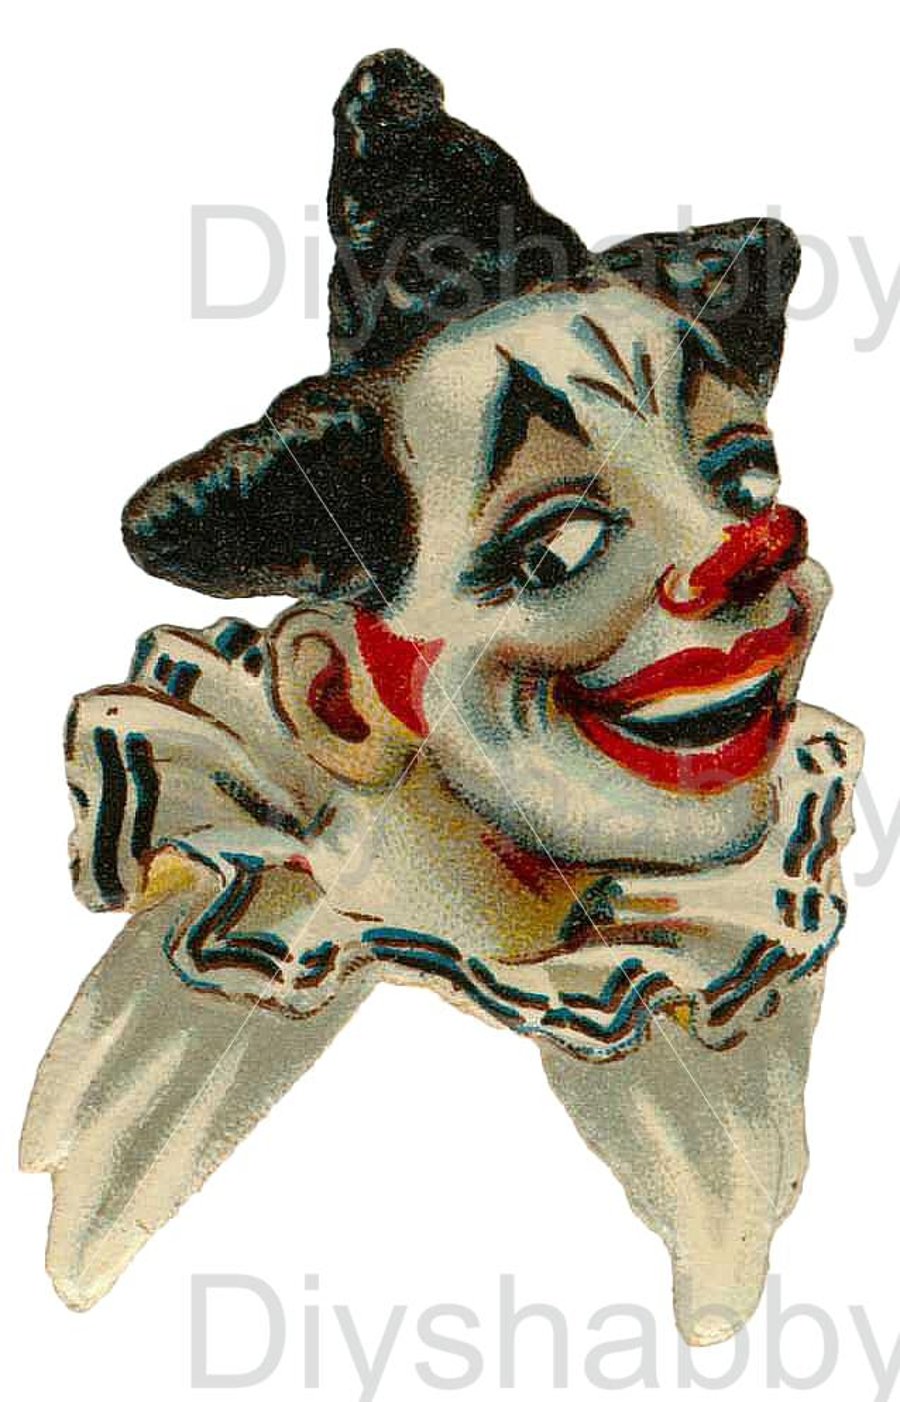 Waterslide Wood Furniture Decal Vintage Image Transfer Shabby Chic Smiling Clown